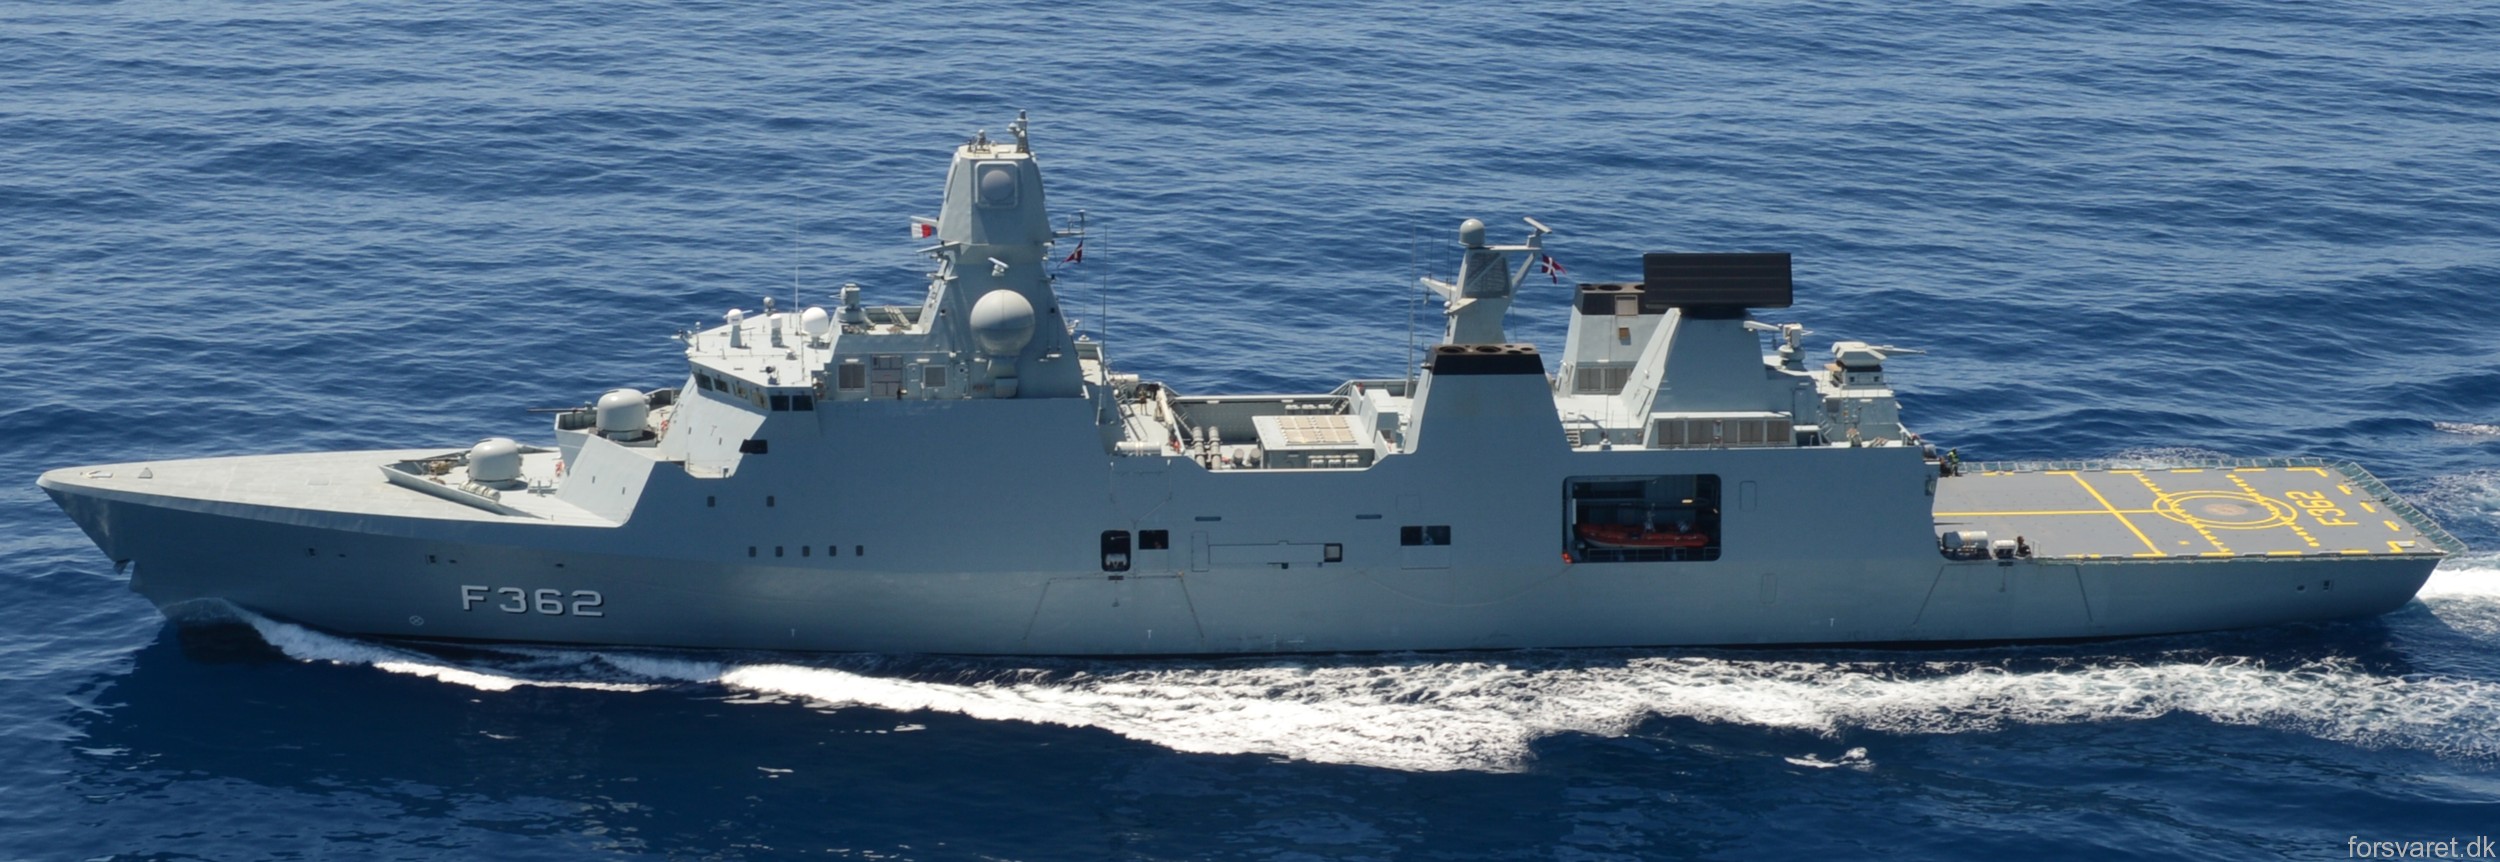 f-362 hdms peter willemoes iver huitfeldt class guided missile frigate ffg royal danish navy 58